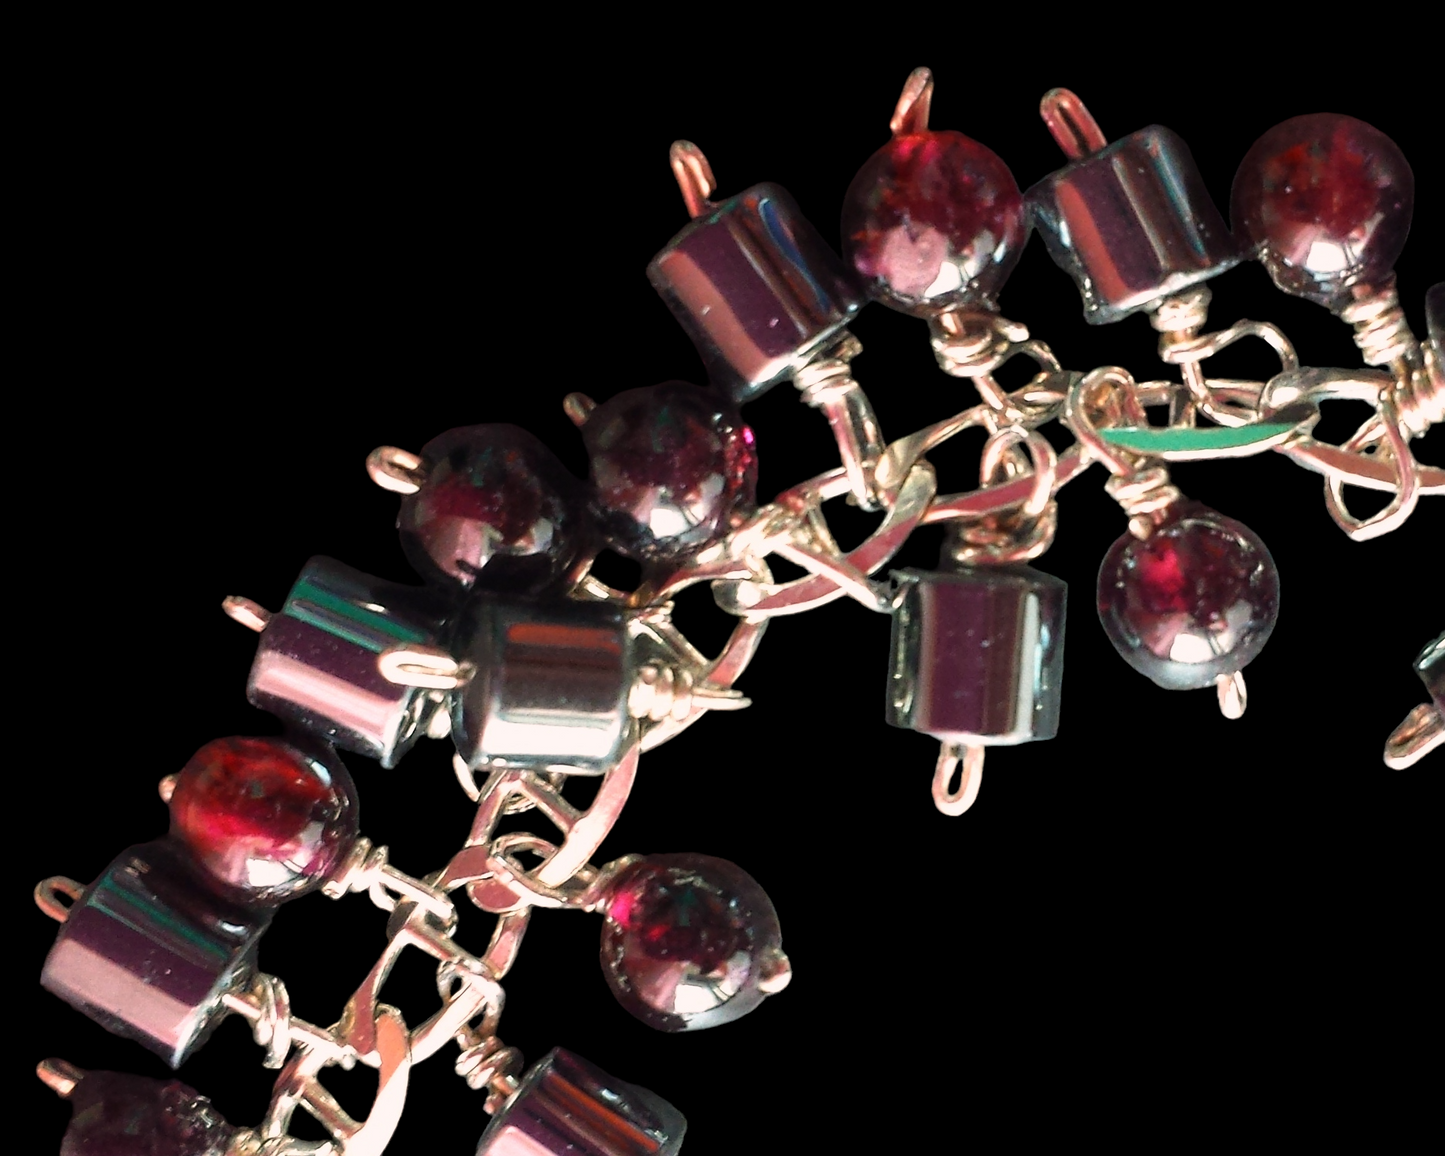 Eco Garnet Hematite Sumac Tree Cluster Bracelet, Upcycled Hematite and Deep Red Pink Garnets on Upcycled Sterling Silver